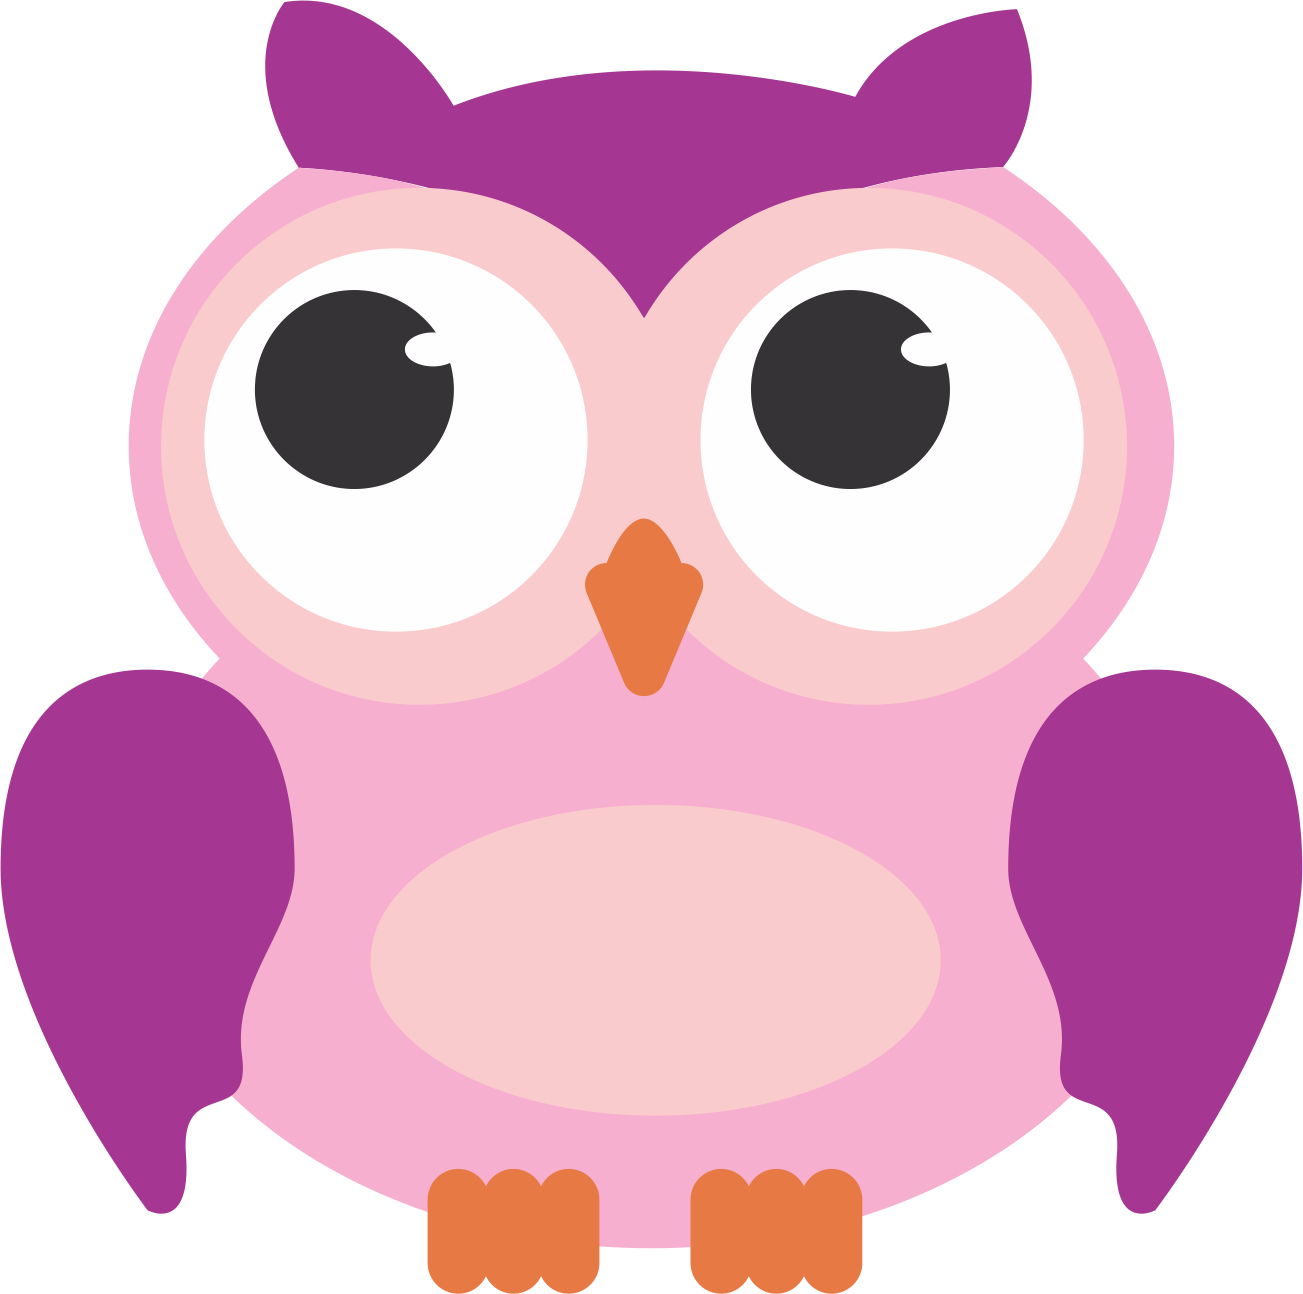 Baby Blue Owl Clip Art - Pink Owl Animation (1303x1294)